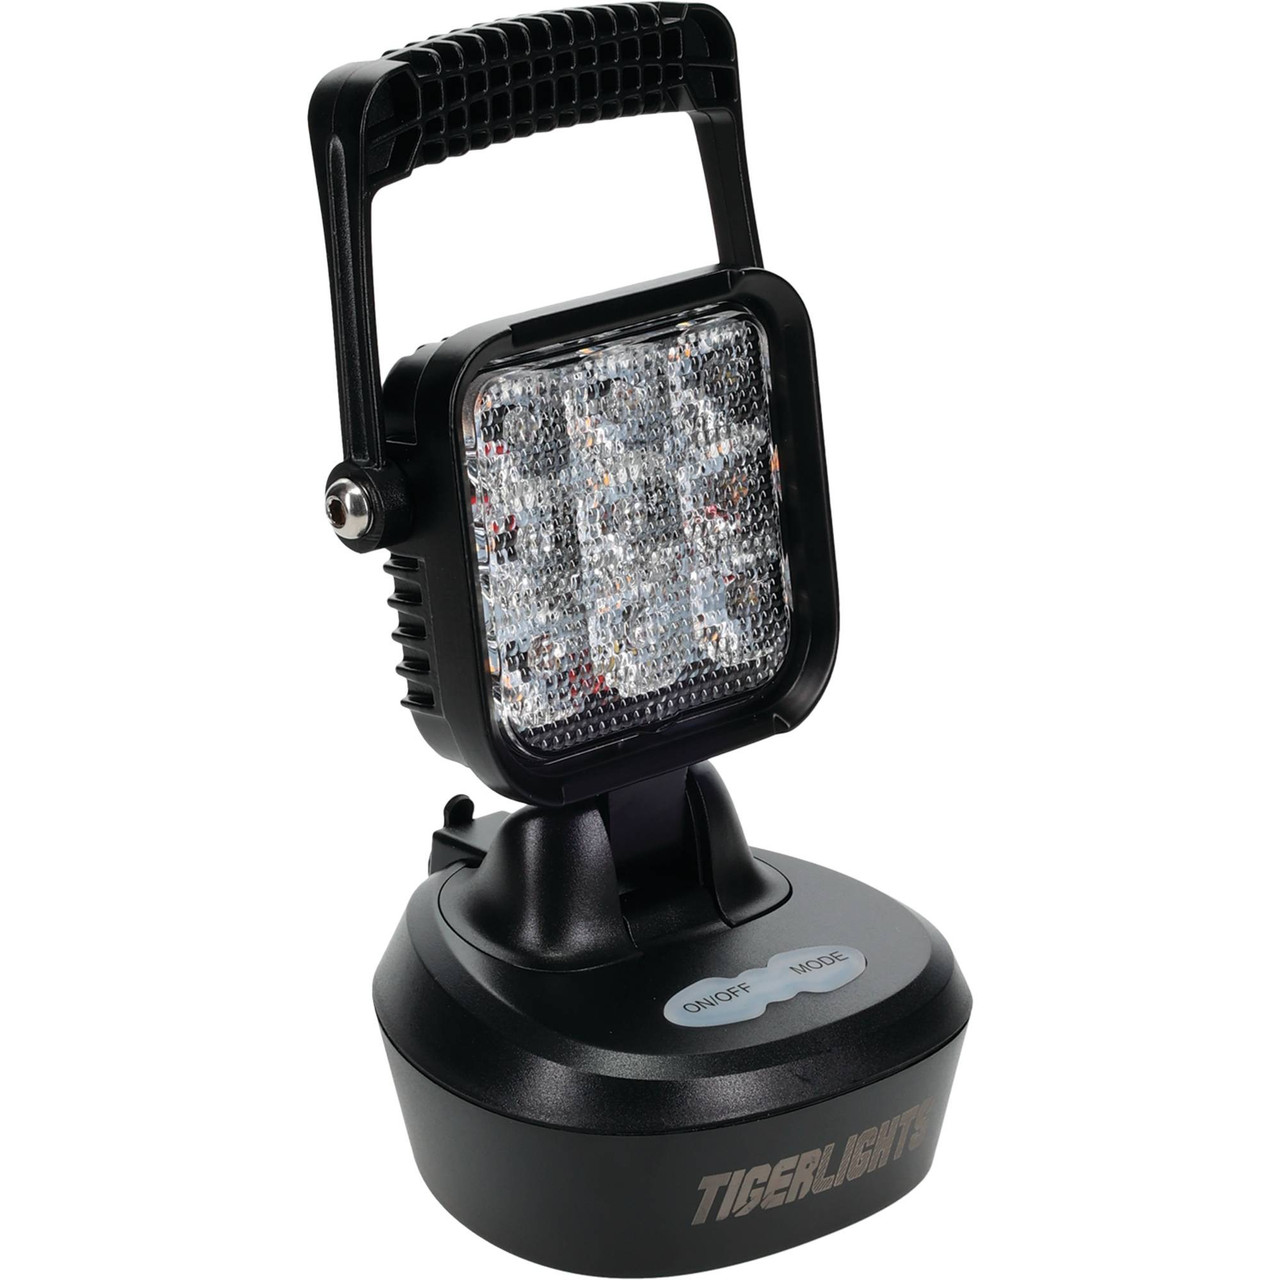 Hunter 45160 Lamplighter Power Outage Light for sale online